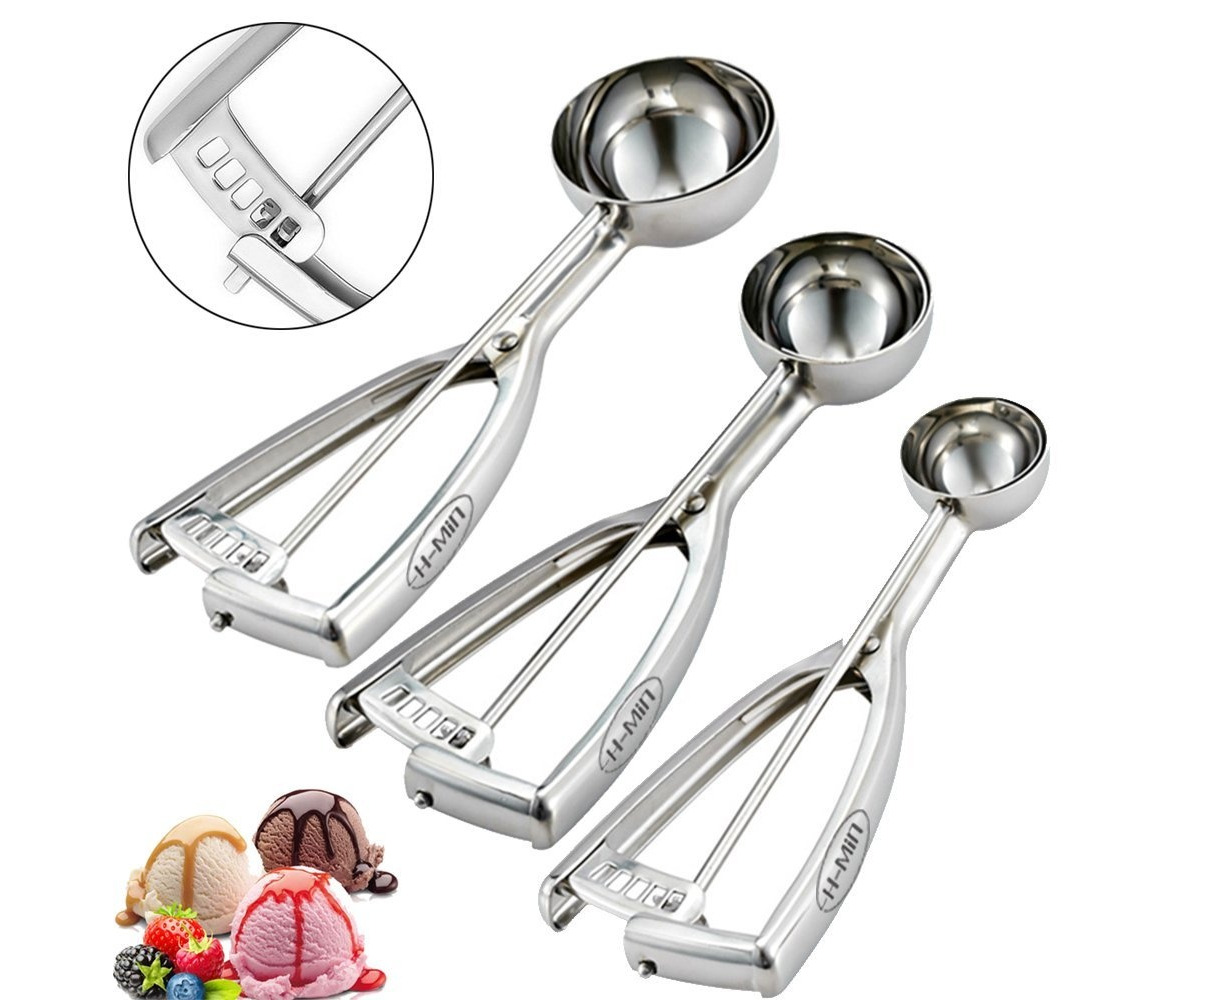 9 Pieces Ice Cream Scoop Small, Medium and Large Stainless Steel Cookie  Scoop Melon Baller Tablespoon Scooper with Trigger Release Baking Supplies